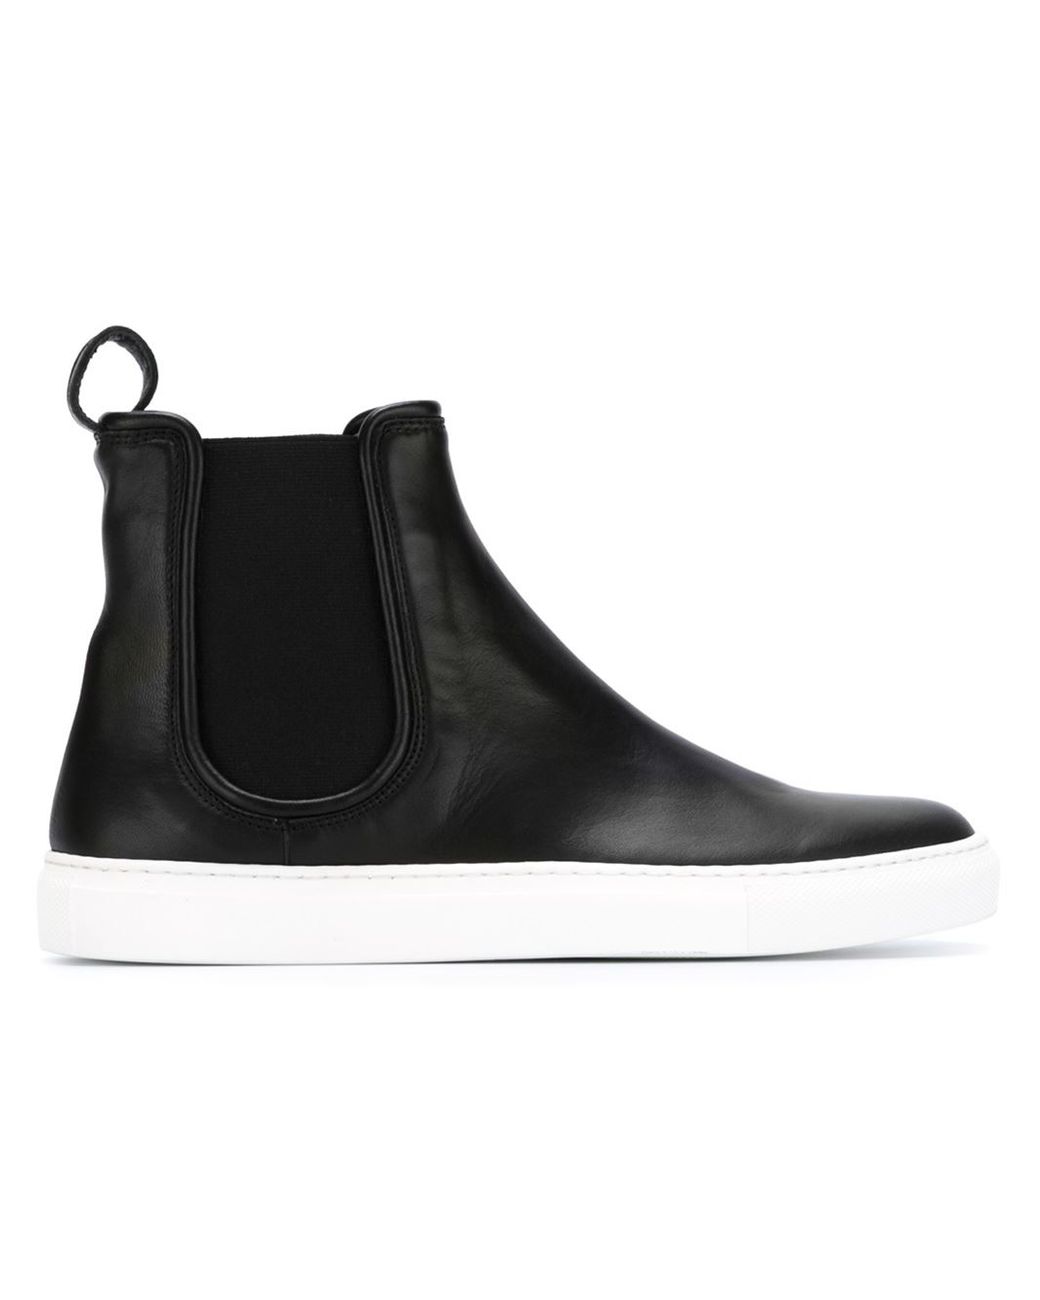 P.A.R.O.S.H. Rubber-Sole Leather Chelsea Boots in Black | Lyst